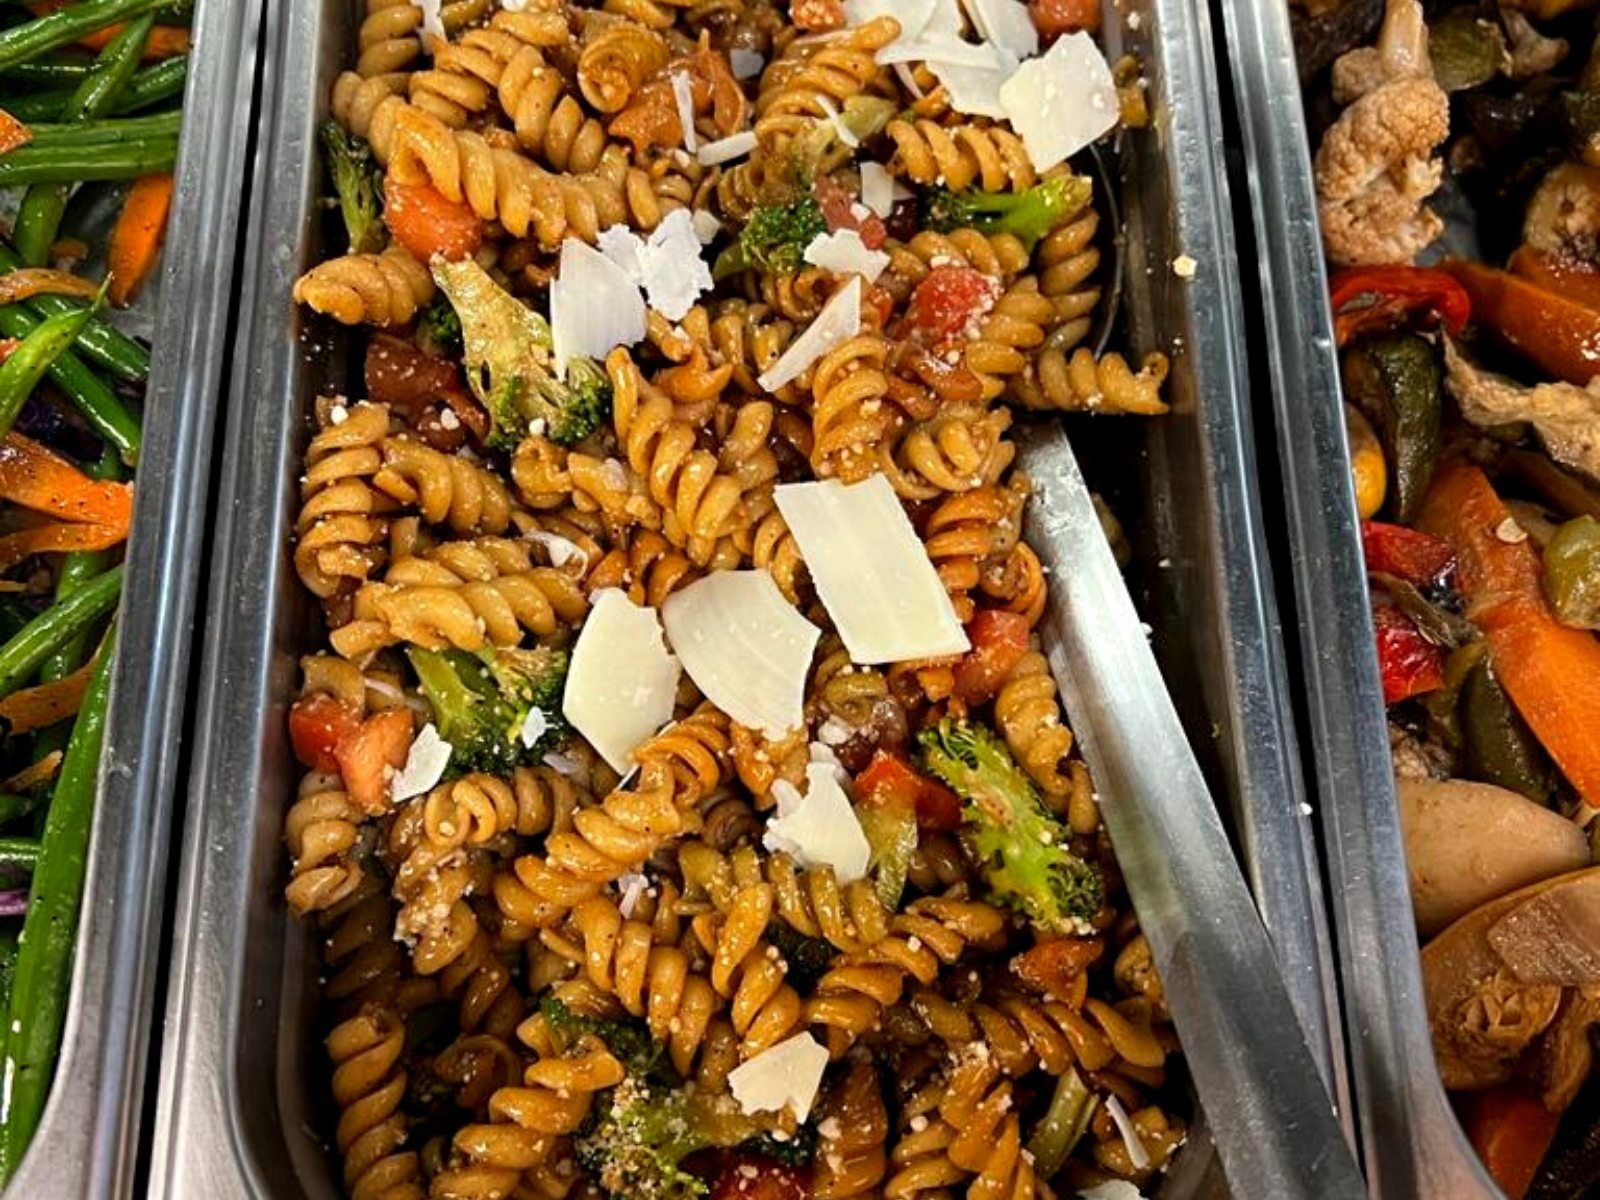 Daily Fresh Cabinet at Feast!  Try our sampler platter for lunch or dinner or pick up your favorite sides to complete any BBQ. @feastcateringwestfield 
.
.
.
. #corporatecaterer #veganfoodie #westfieldnjlocal #choppedsalads #cateringnj #feastcatering